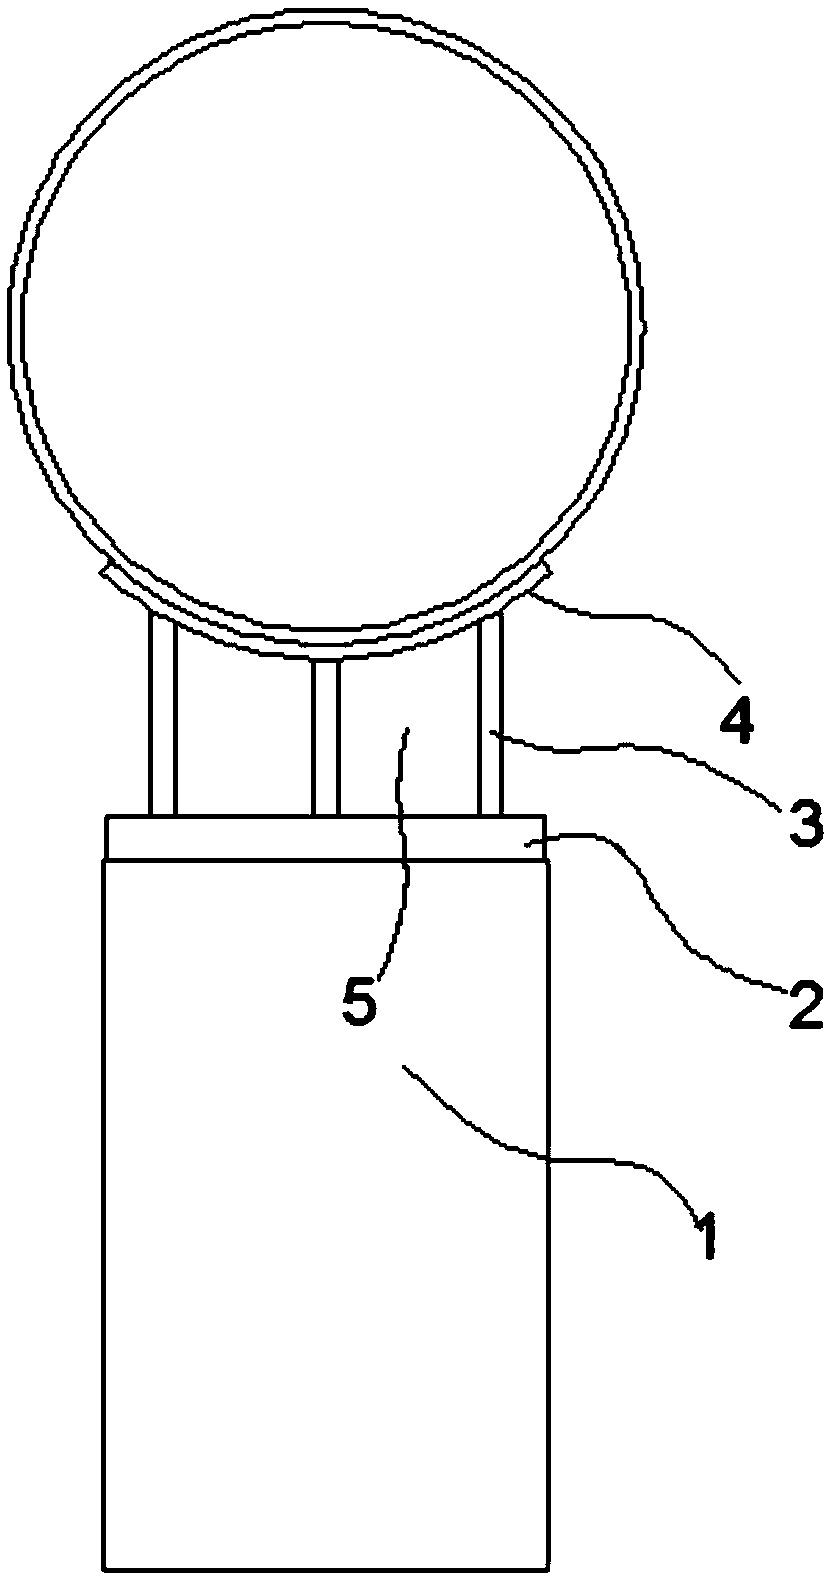 Method for installing and constructing 56-inch oil and gas conveying pipelines